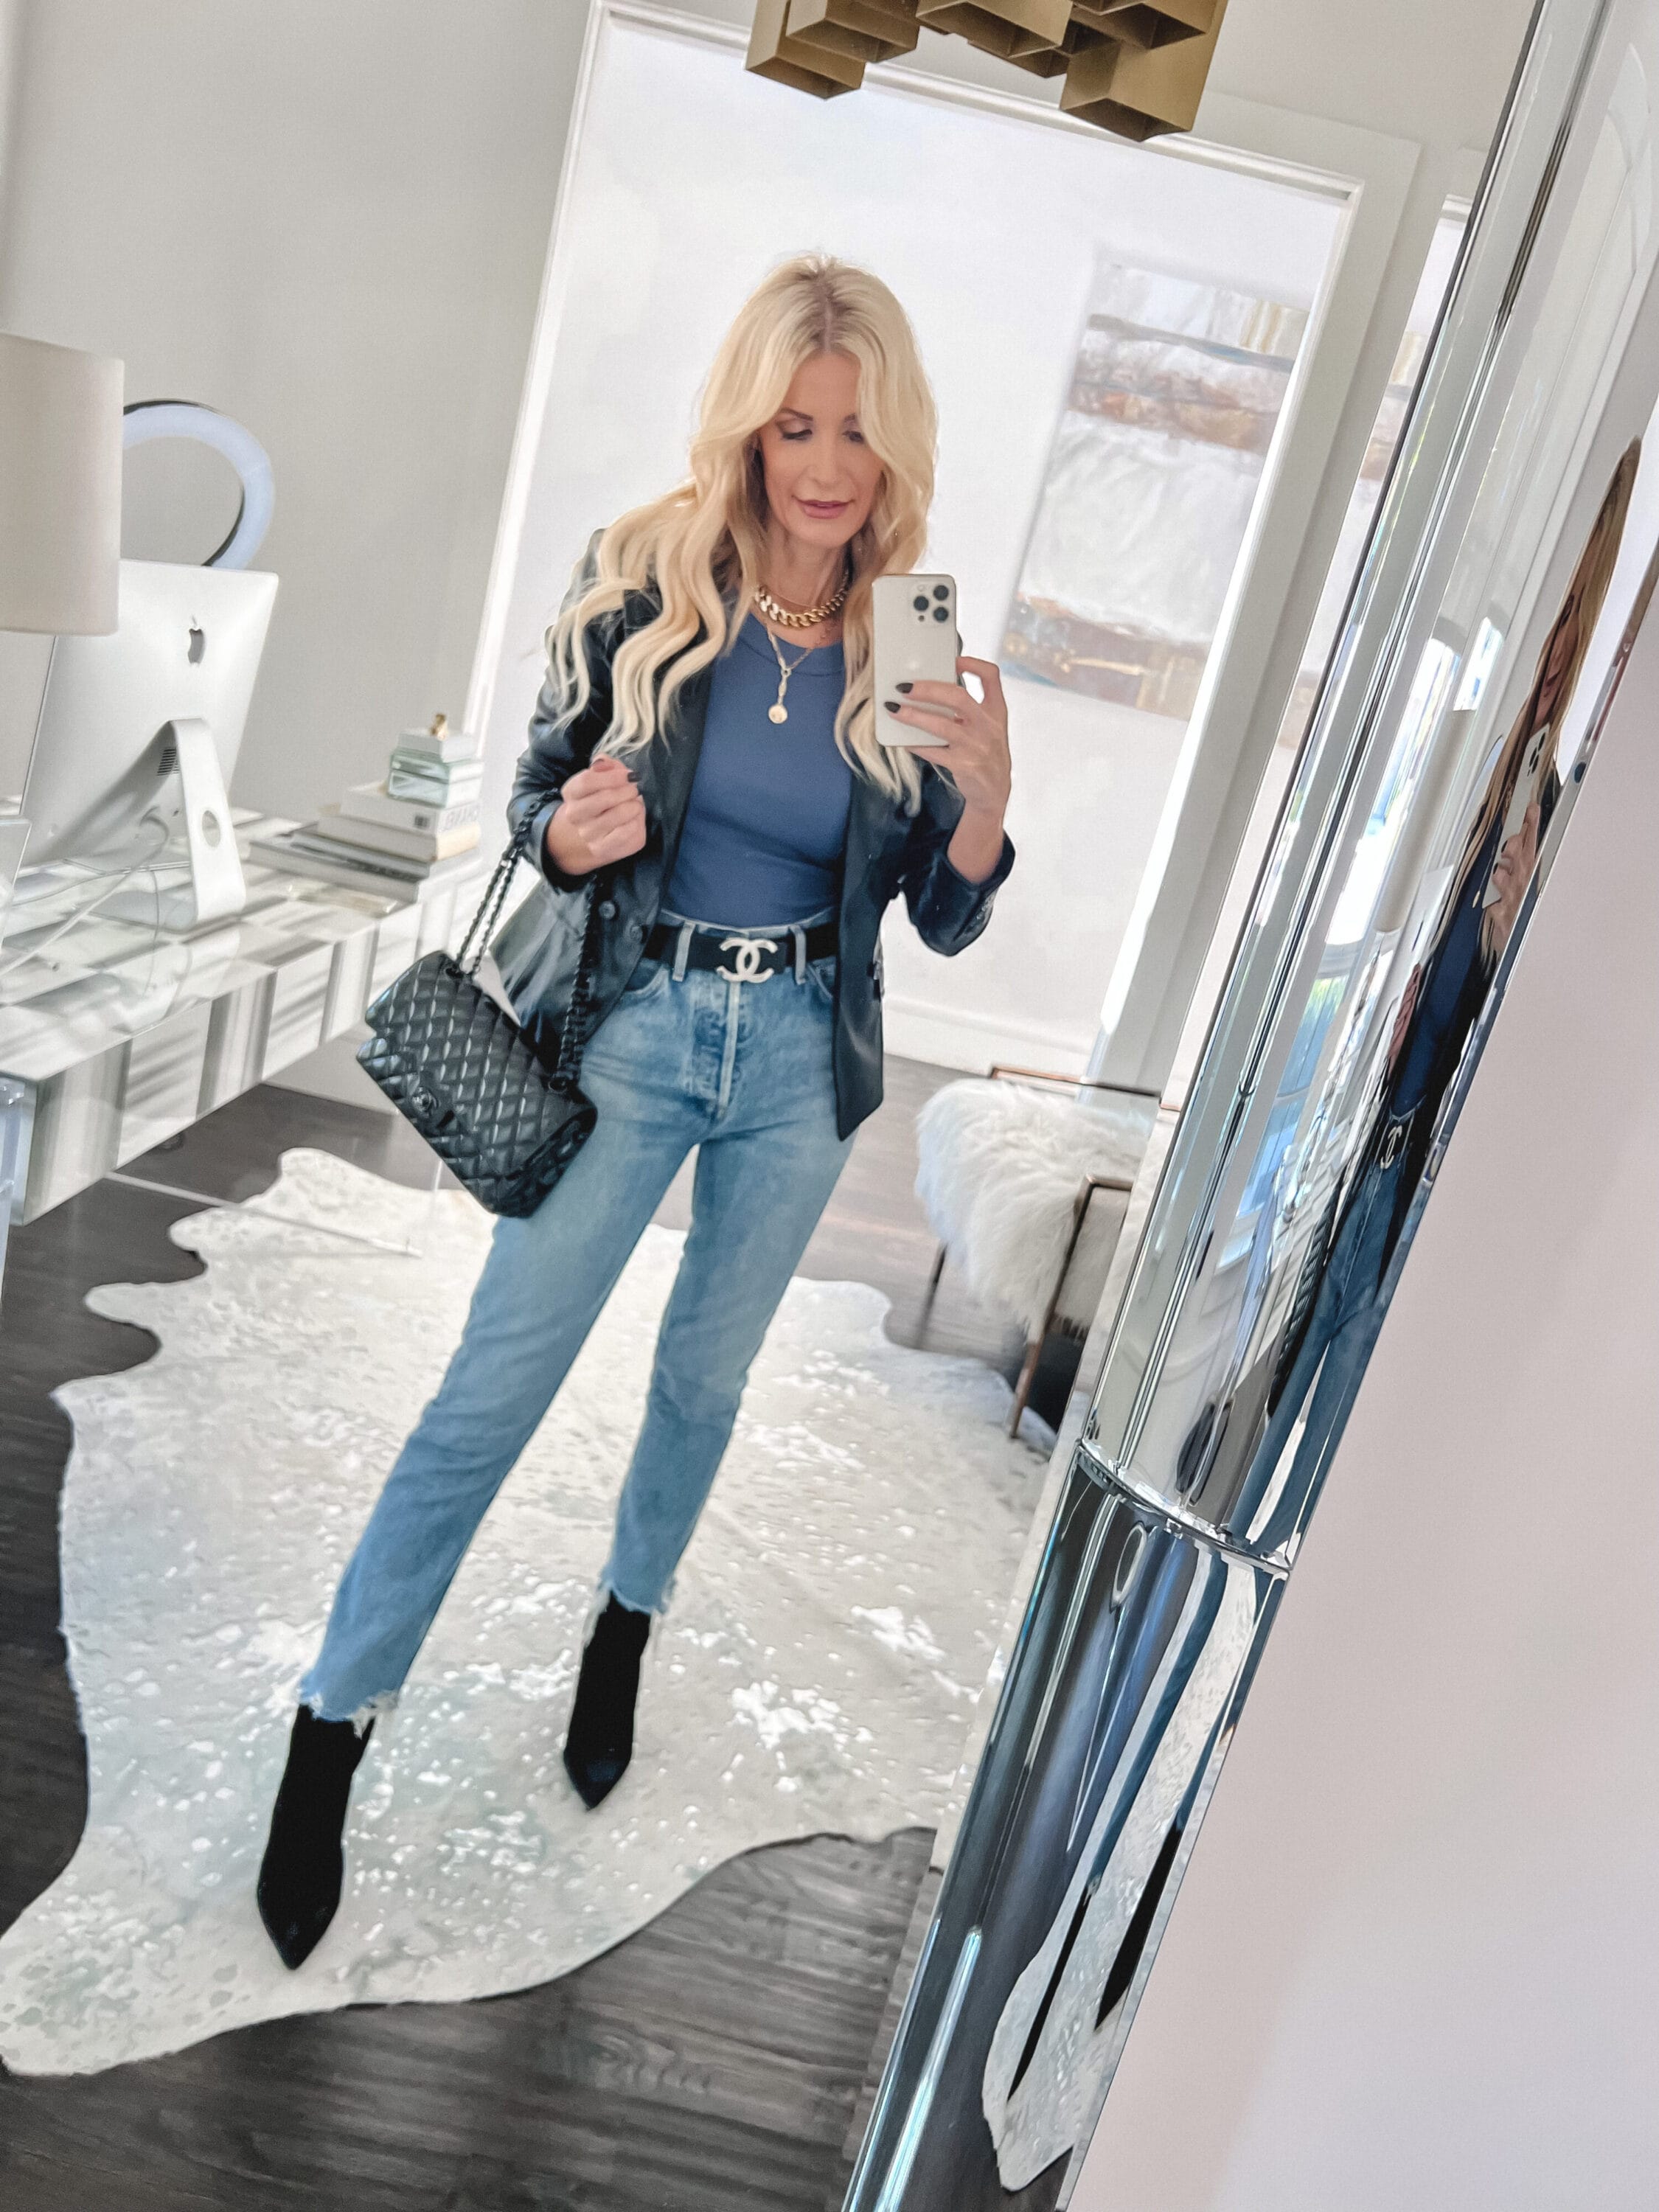 Over 40 fashion influencer wearing Evereve faux leather blazer with Riley crop jeans and black booties.